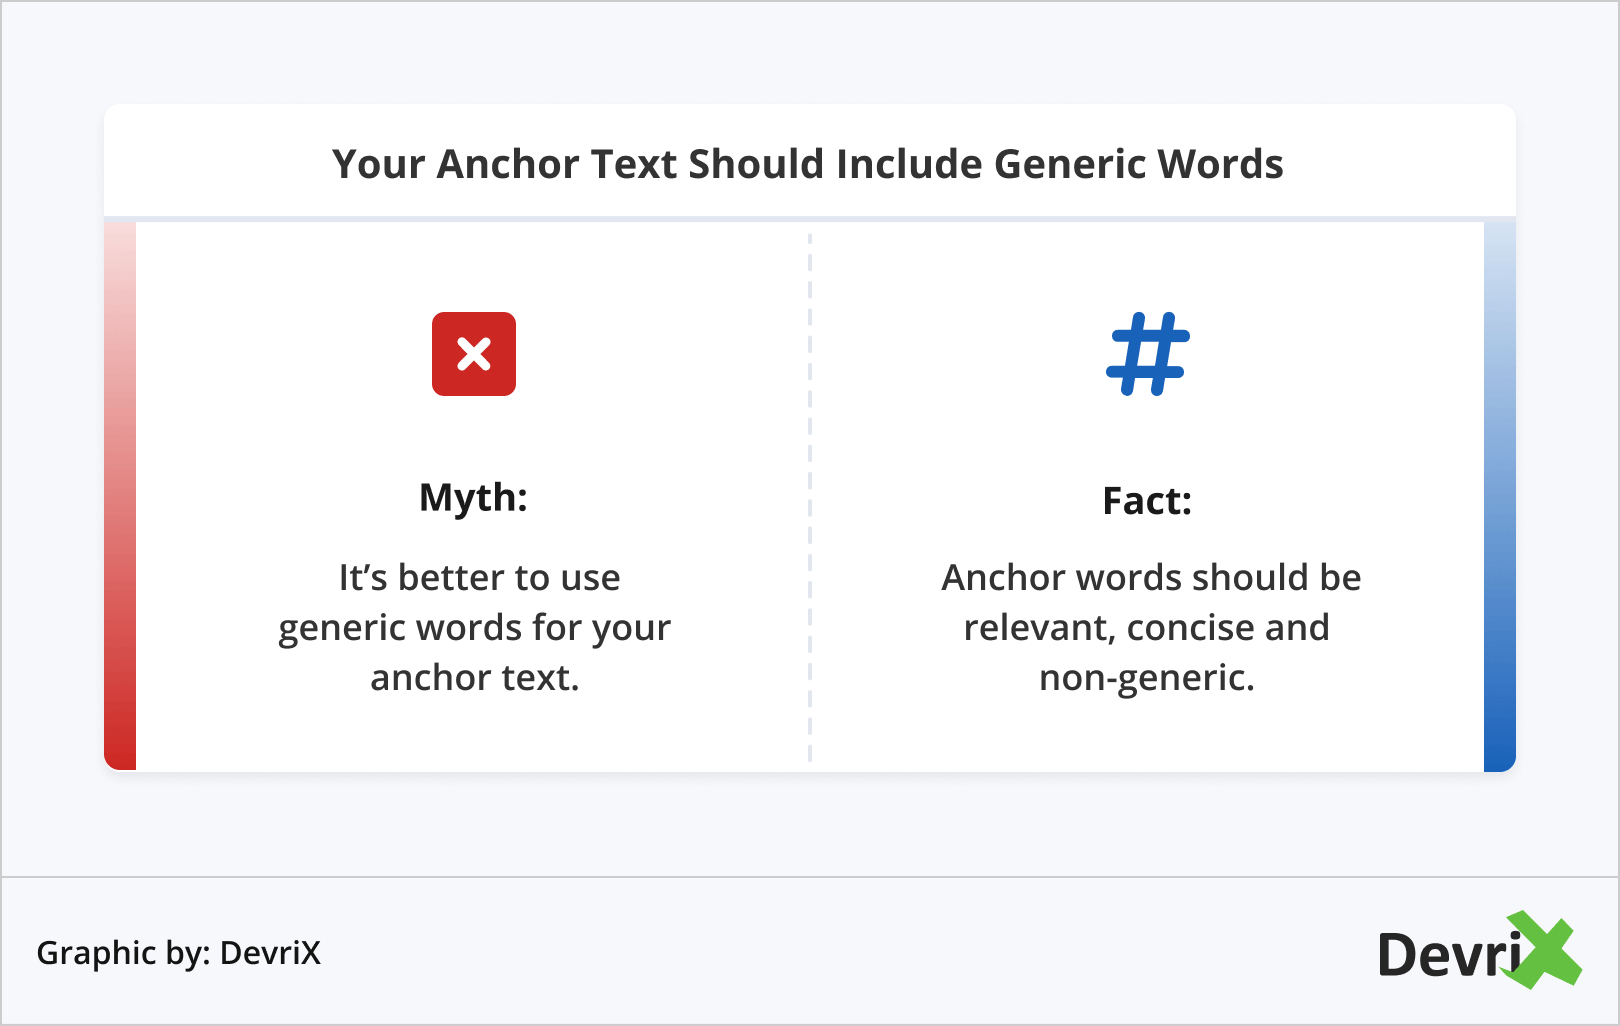 Your Anchor Text Should Include Generic Words